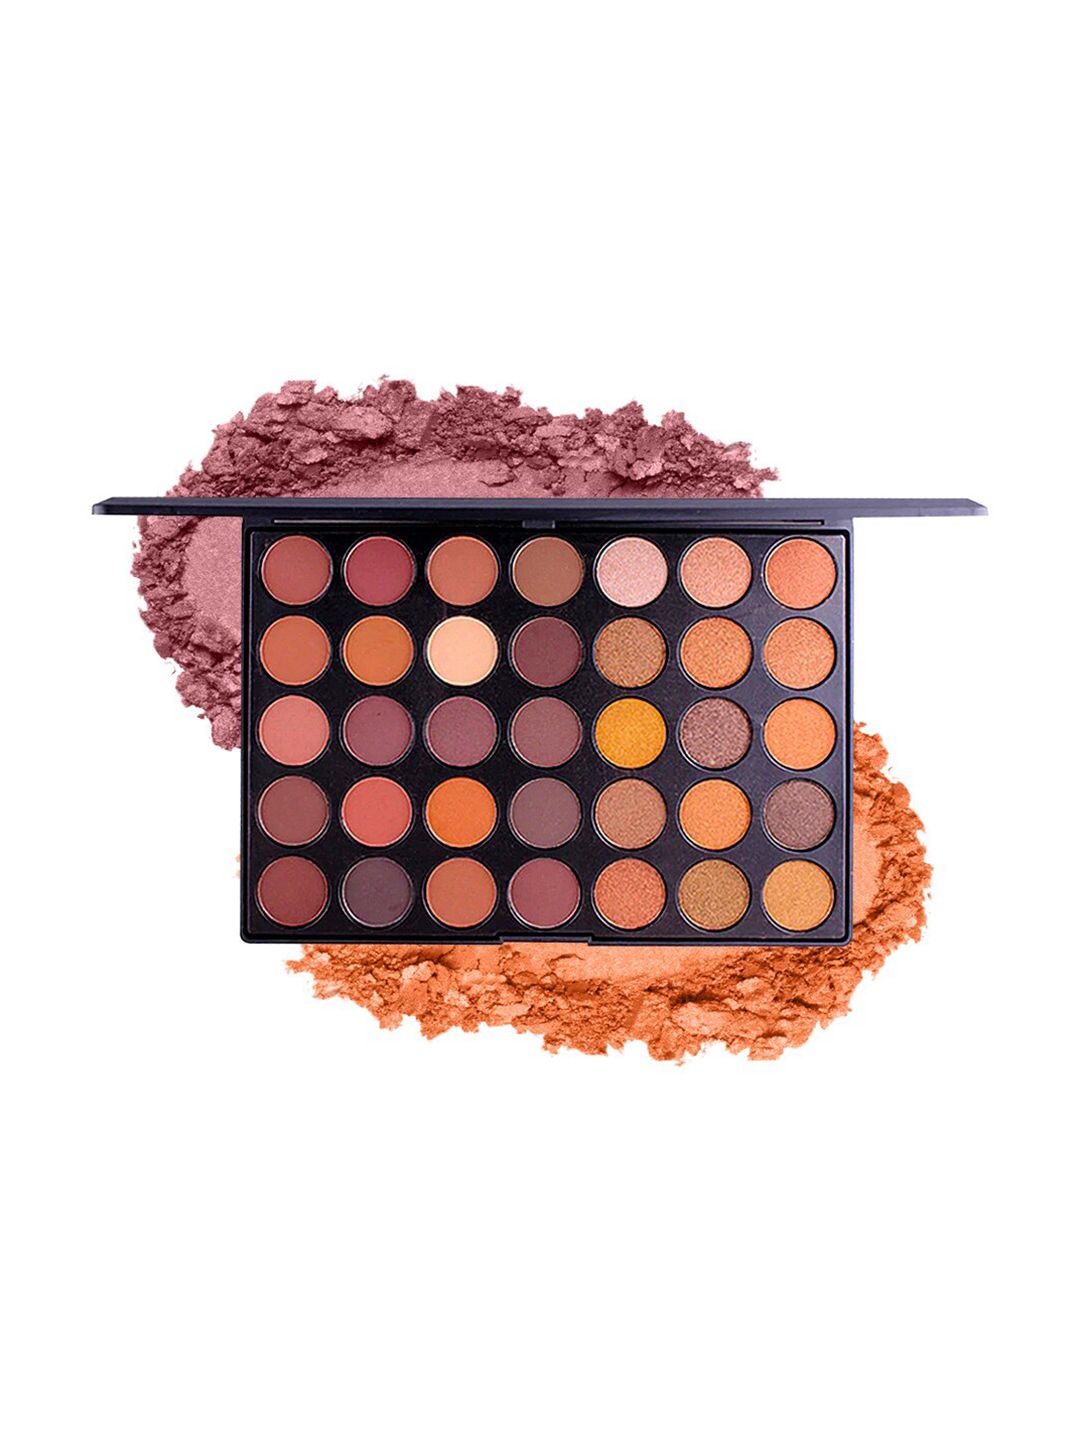 MISS ROSE 35 Color Matte Professional Eyeshadow Palette Price in India